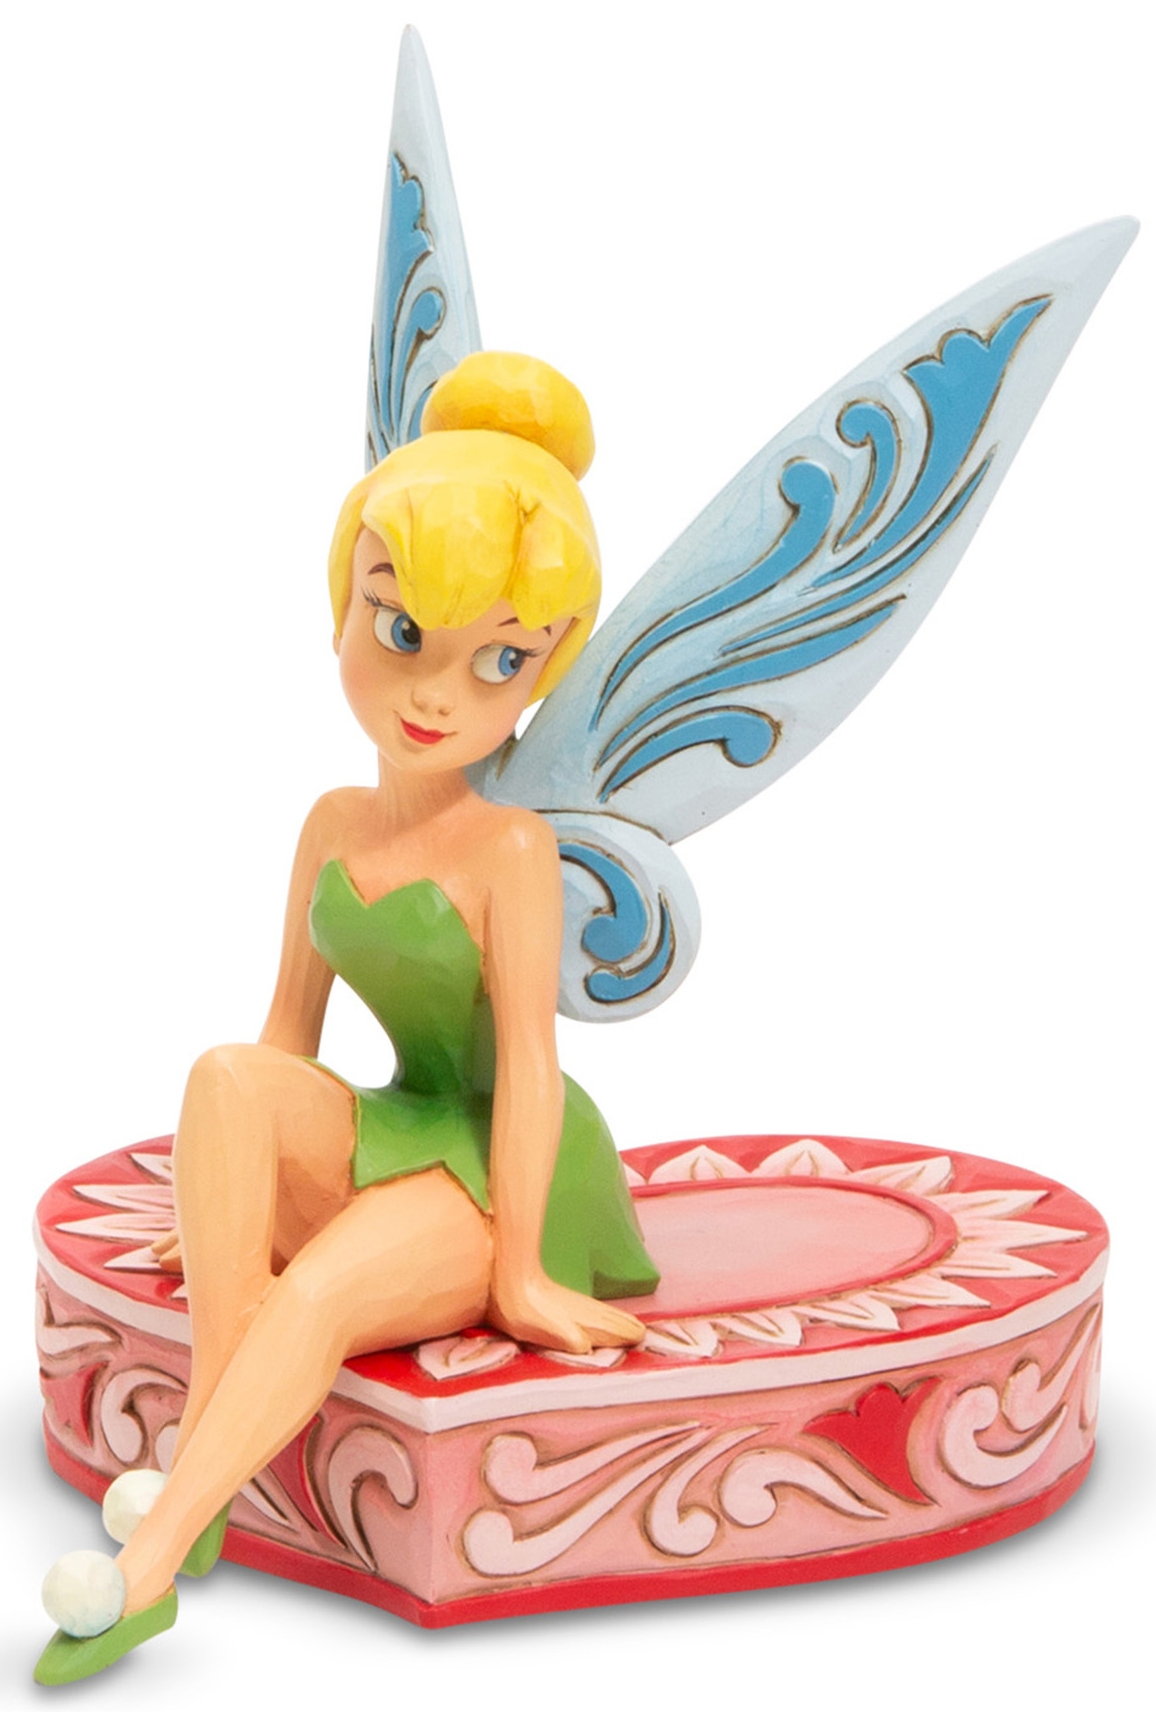 Disney Traditions by Jim Shore 6005966 Tinkerbell on a Box of Chocolates Figurine